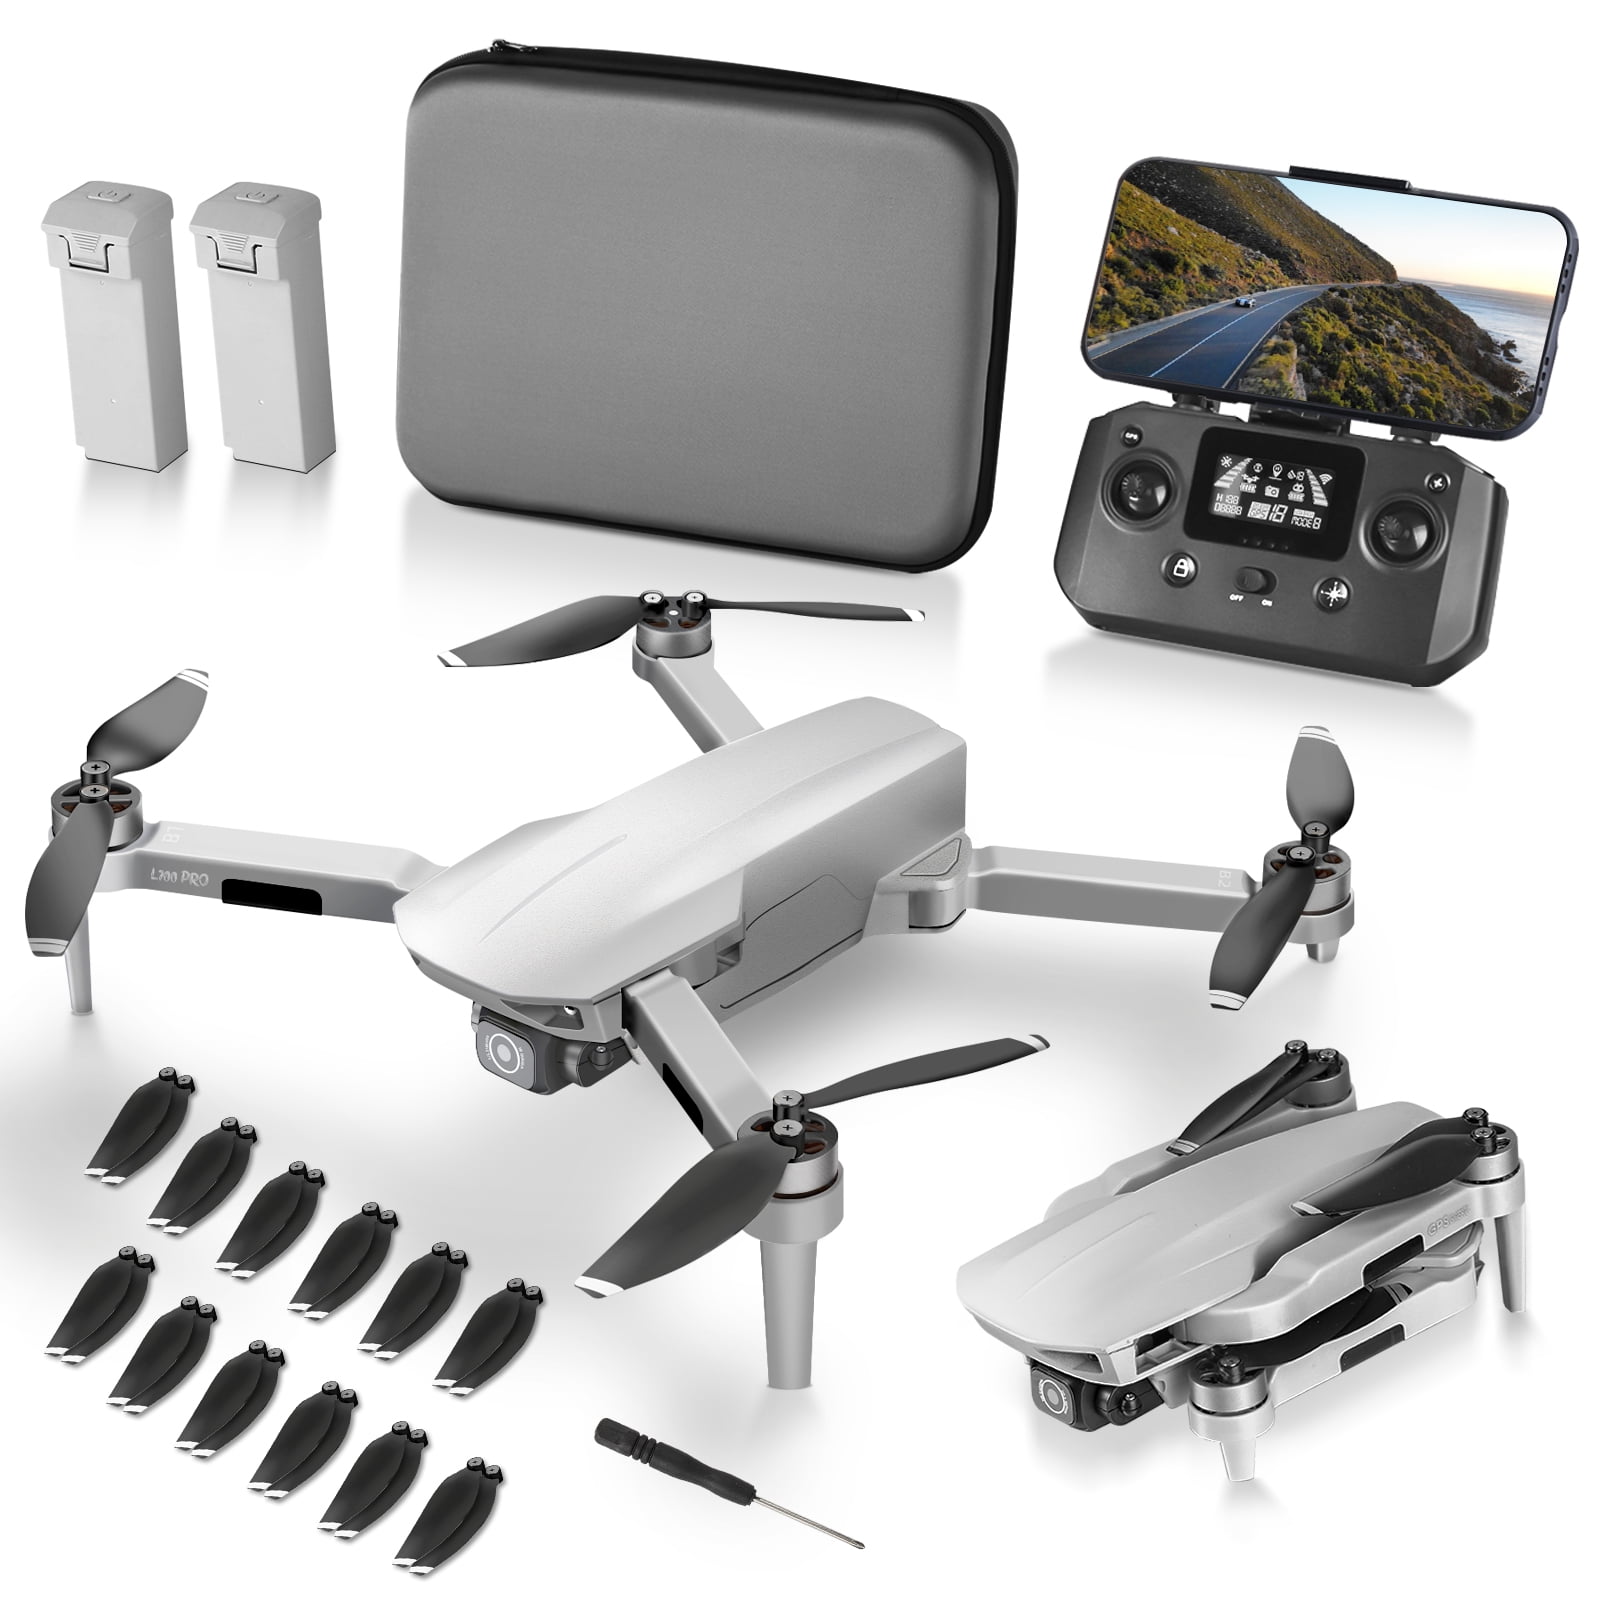 verden strække pouch HHD Drone with 4K Camera for Adults and Beginners, 5G Wifi Transmission, 40  Minutes Flight Time,Grey - Walmart.com